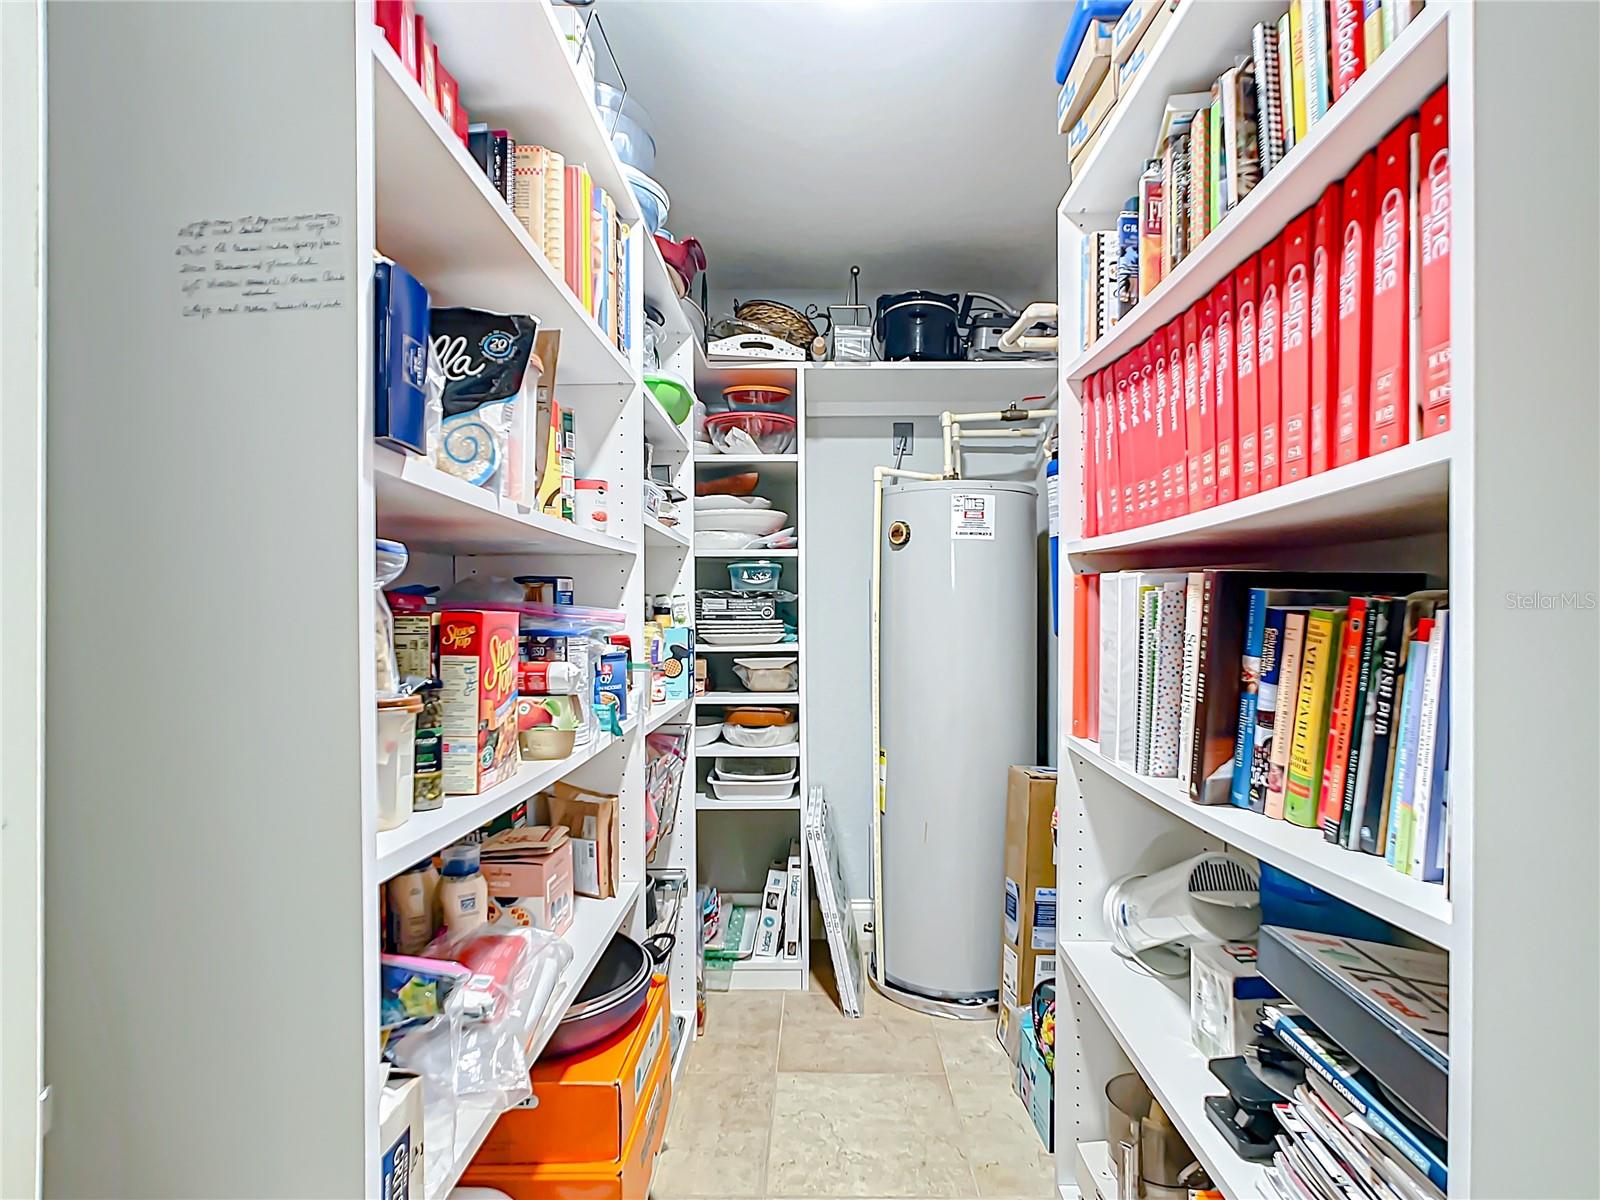 Right next to your kitchen you have a walk in pantry which offers lots of storage space.